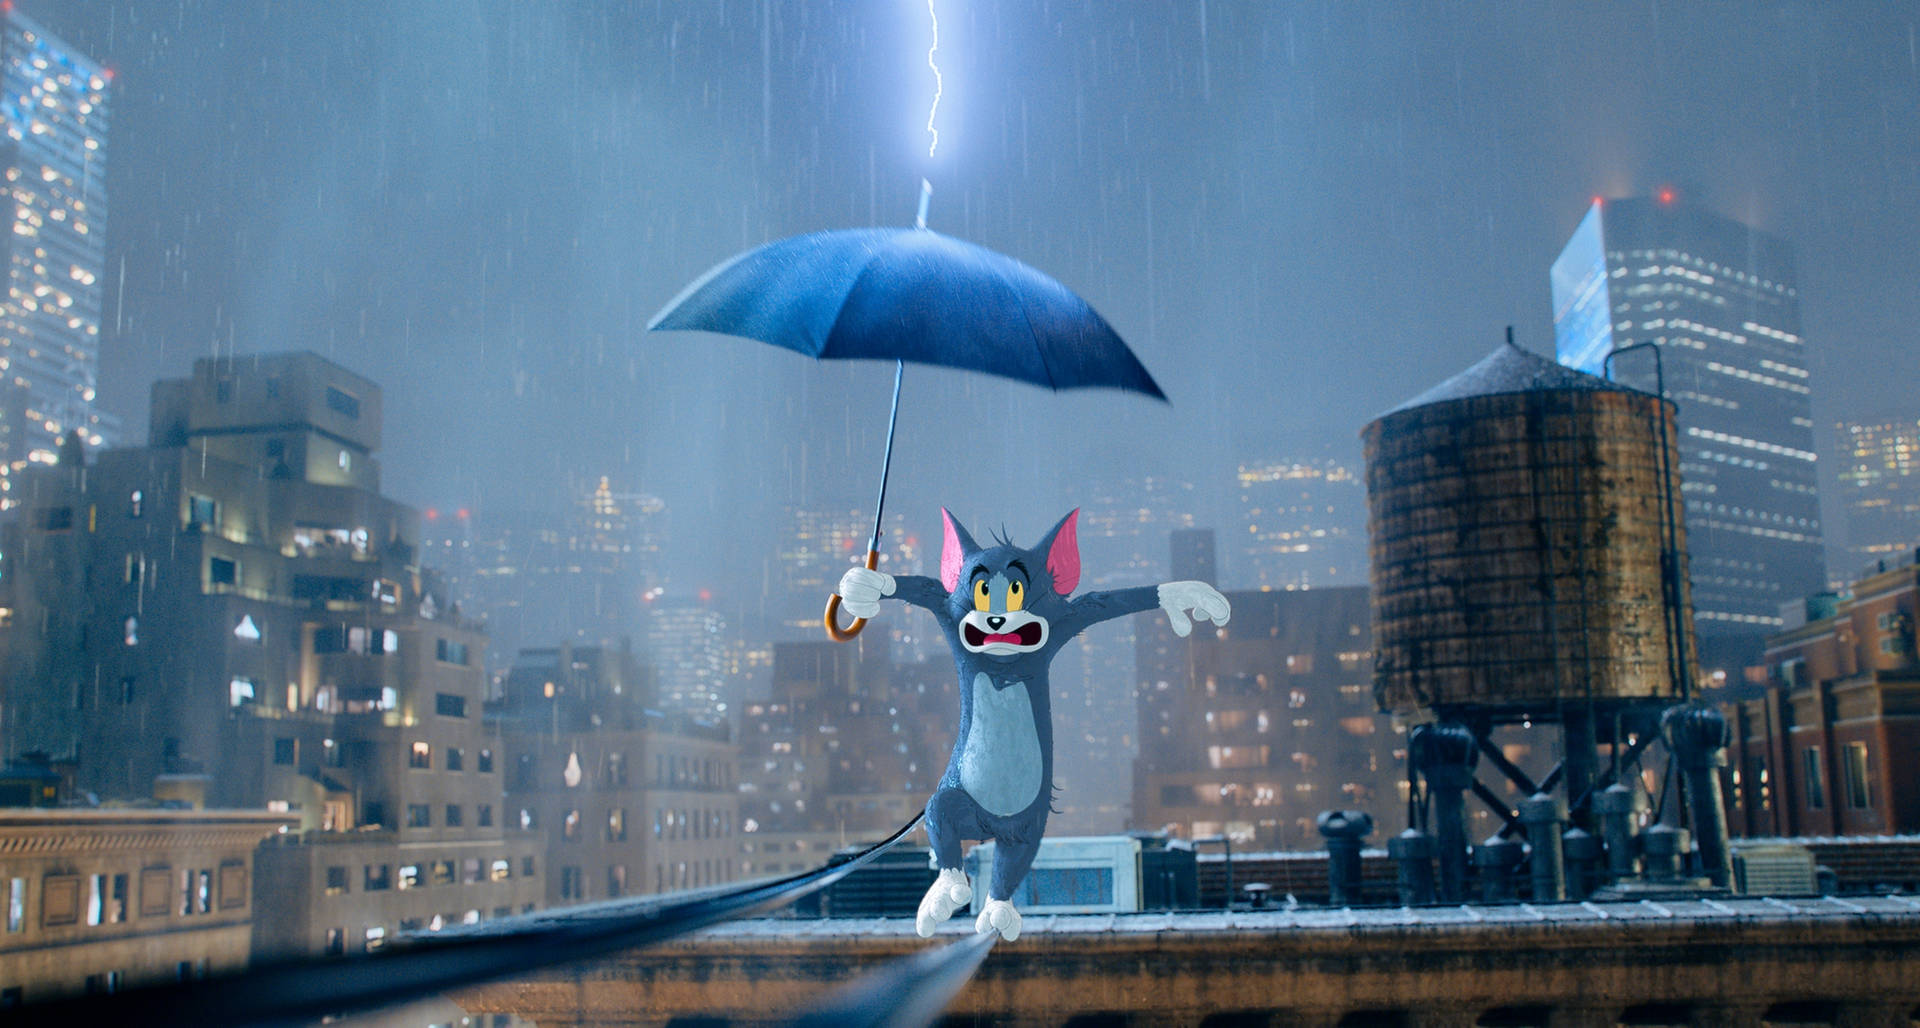 Cute Tom And Jerry With Umbrella